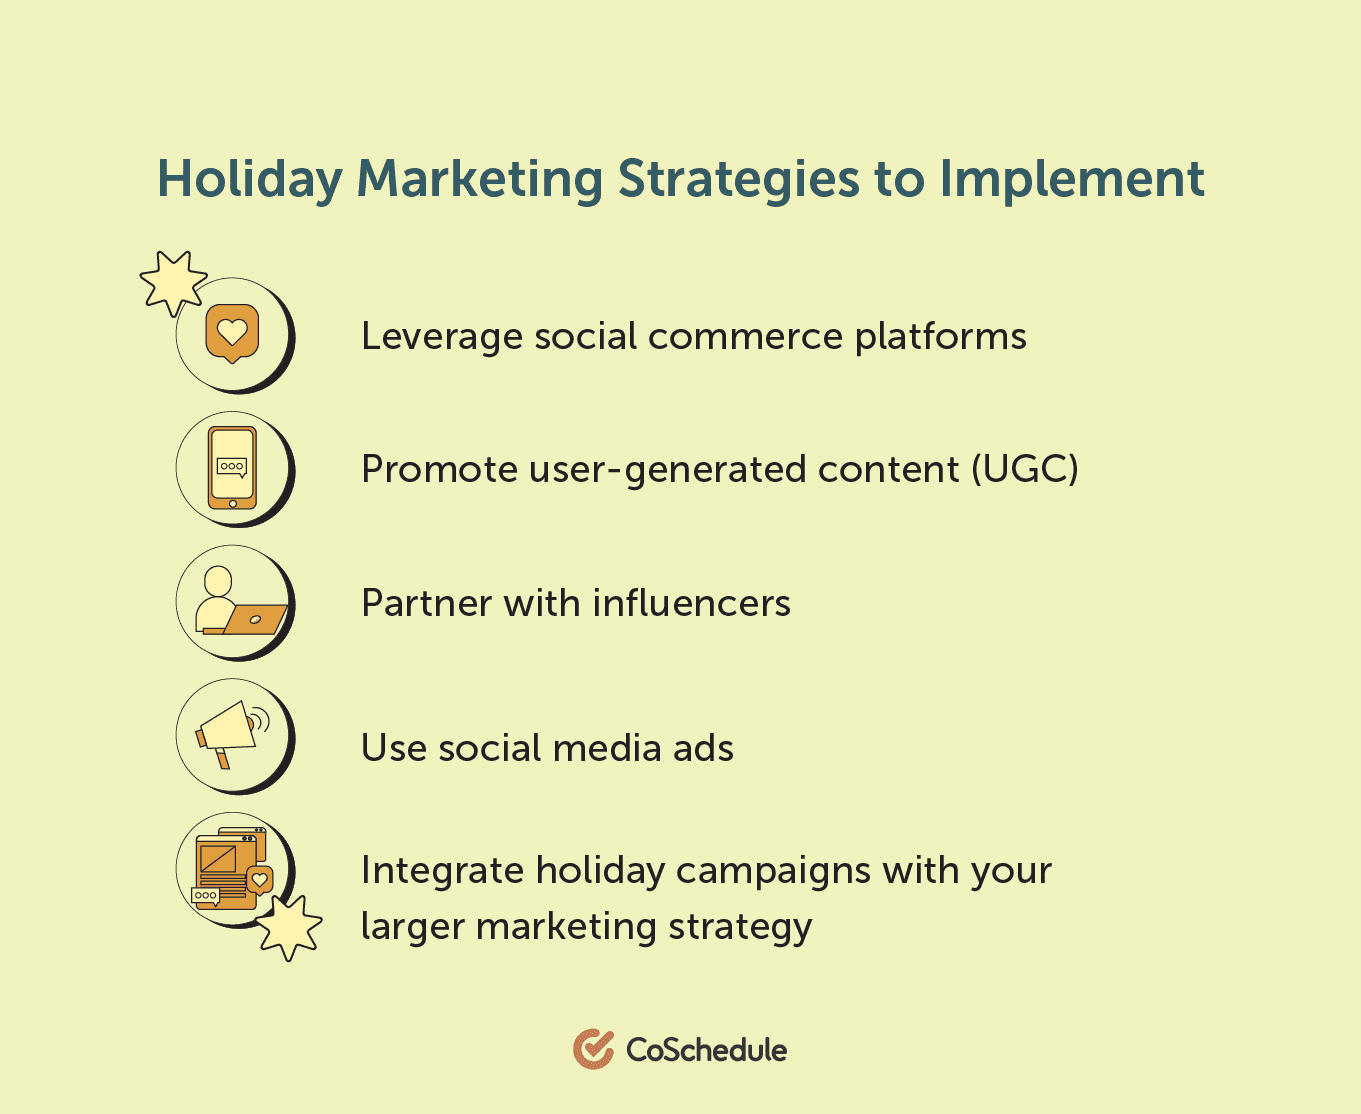 Holiday marketing strategies to implement